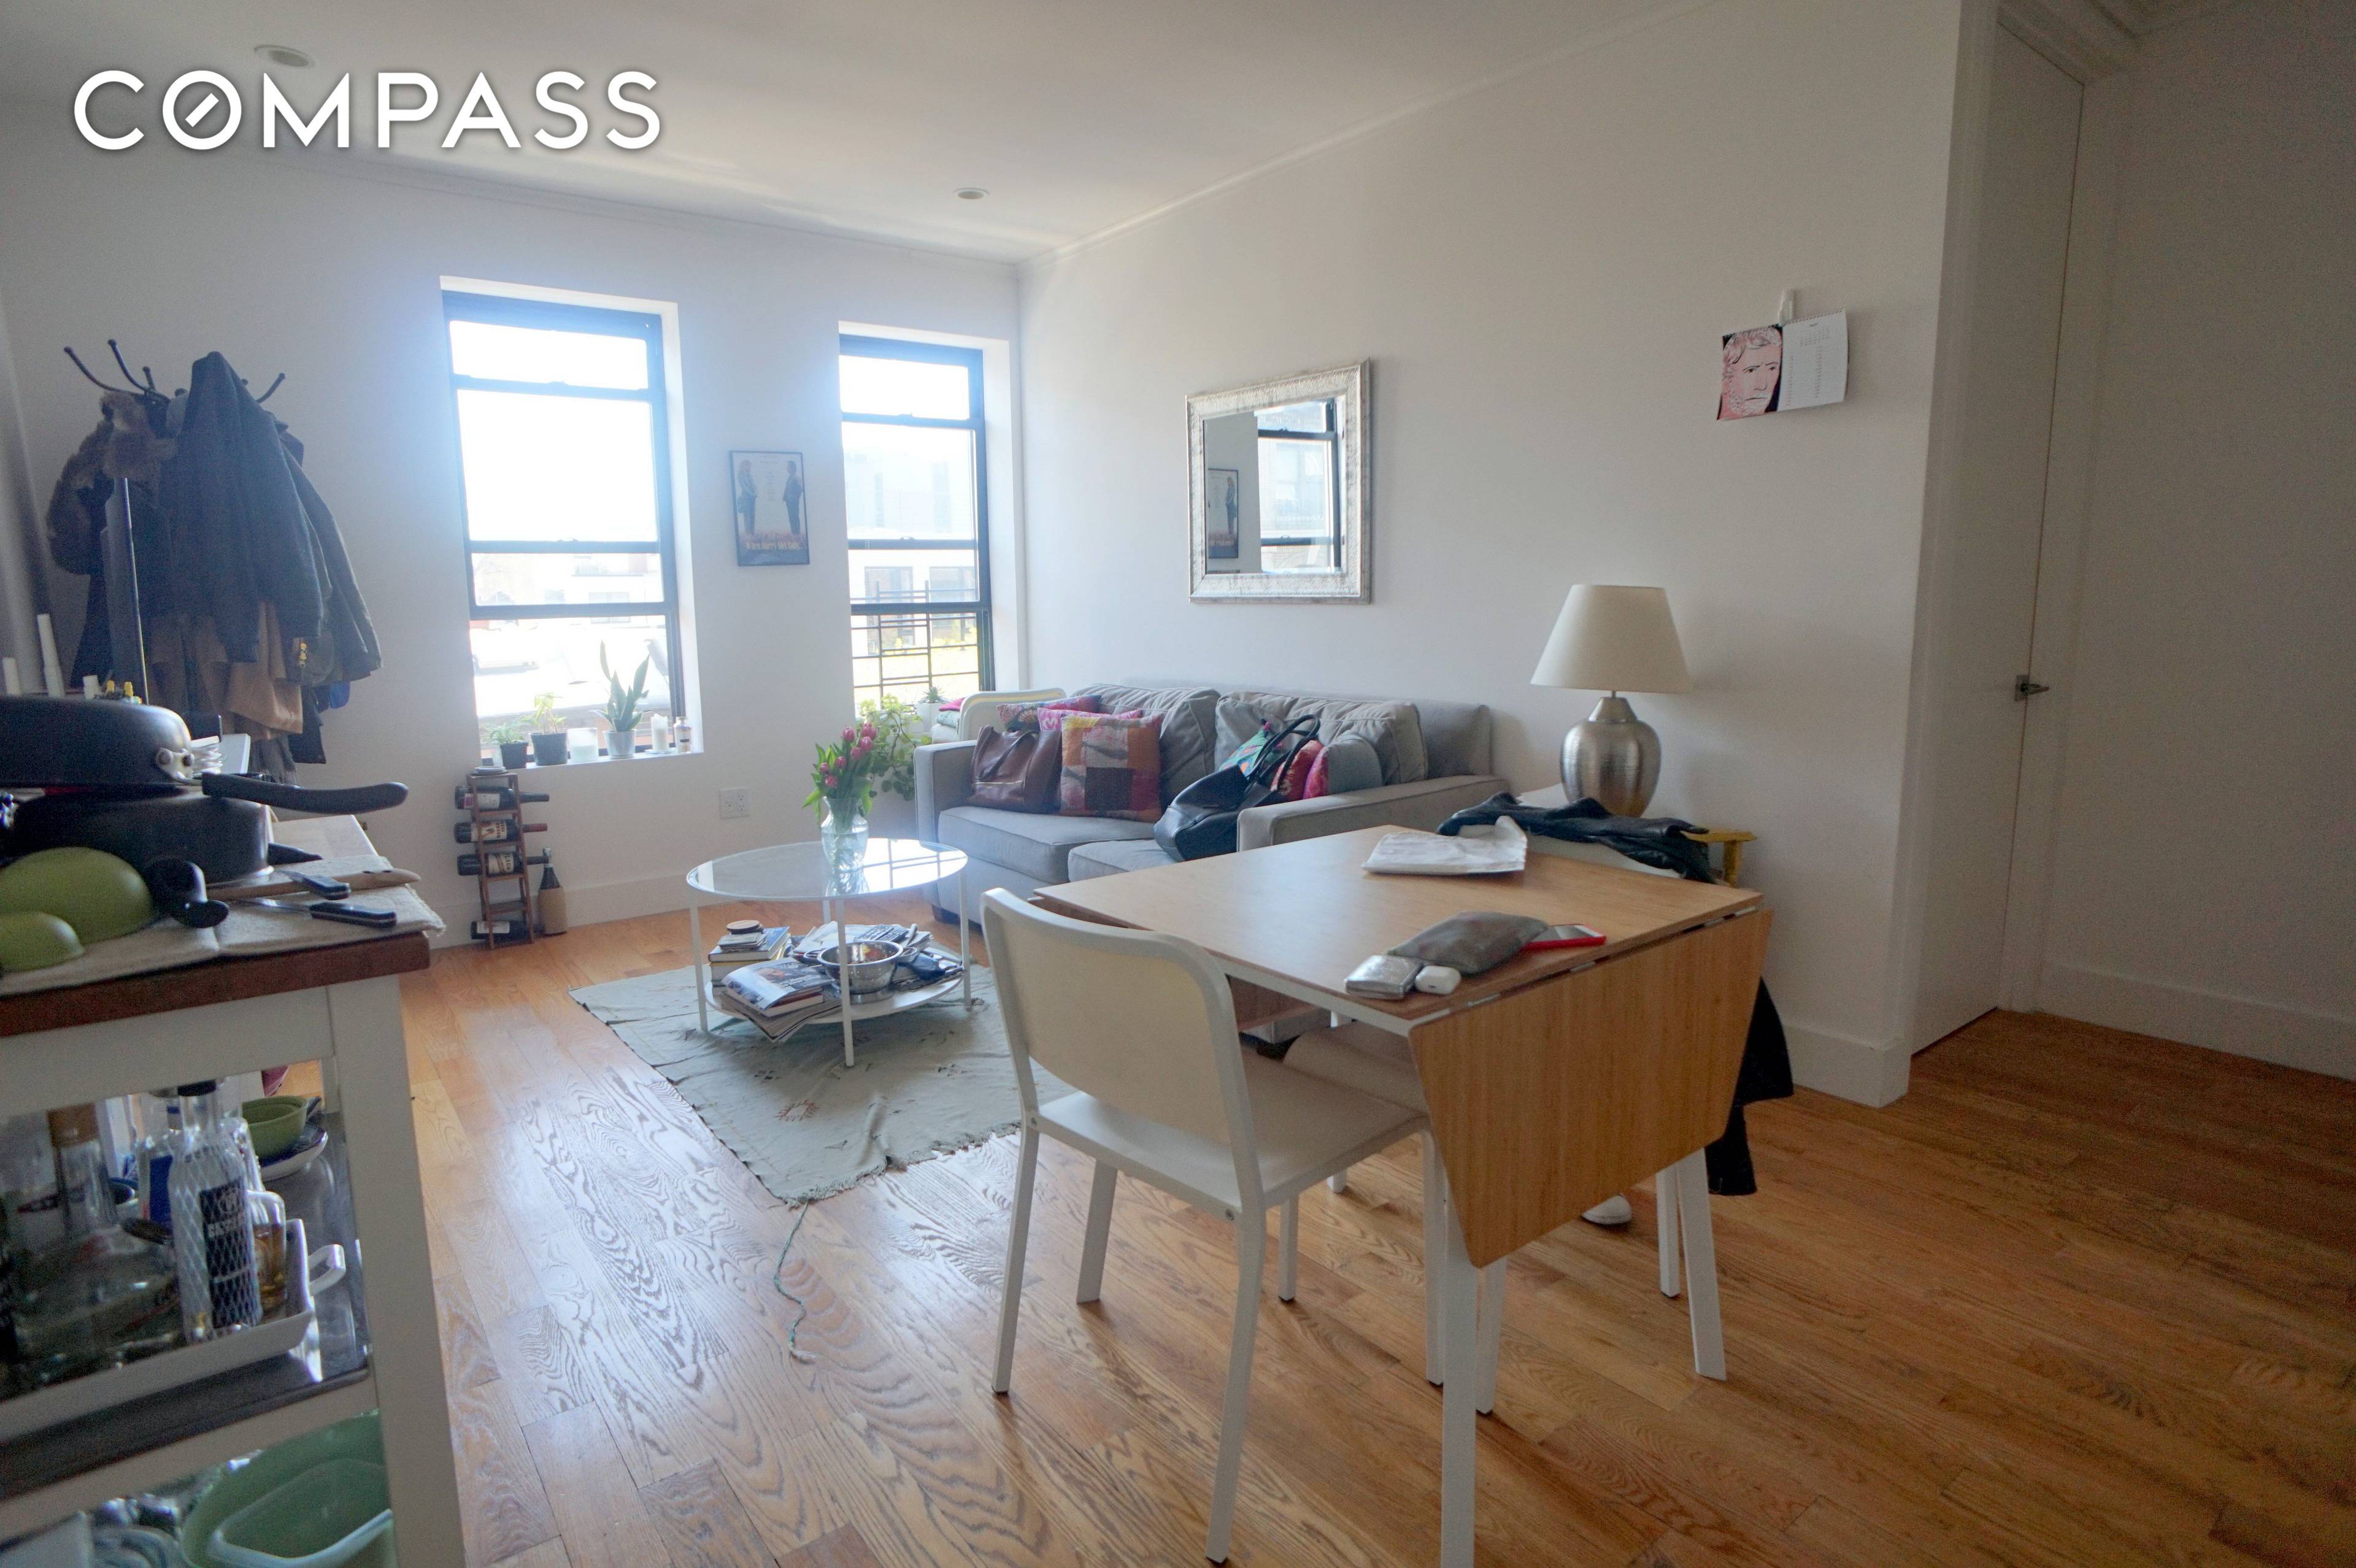 Welcome home to this renovated 3 bedroom, 1 bathroom apartment located in Park Slope, between vibrant 5th and 6th avenues.